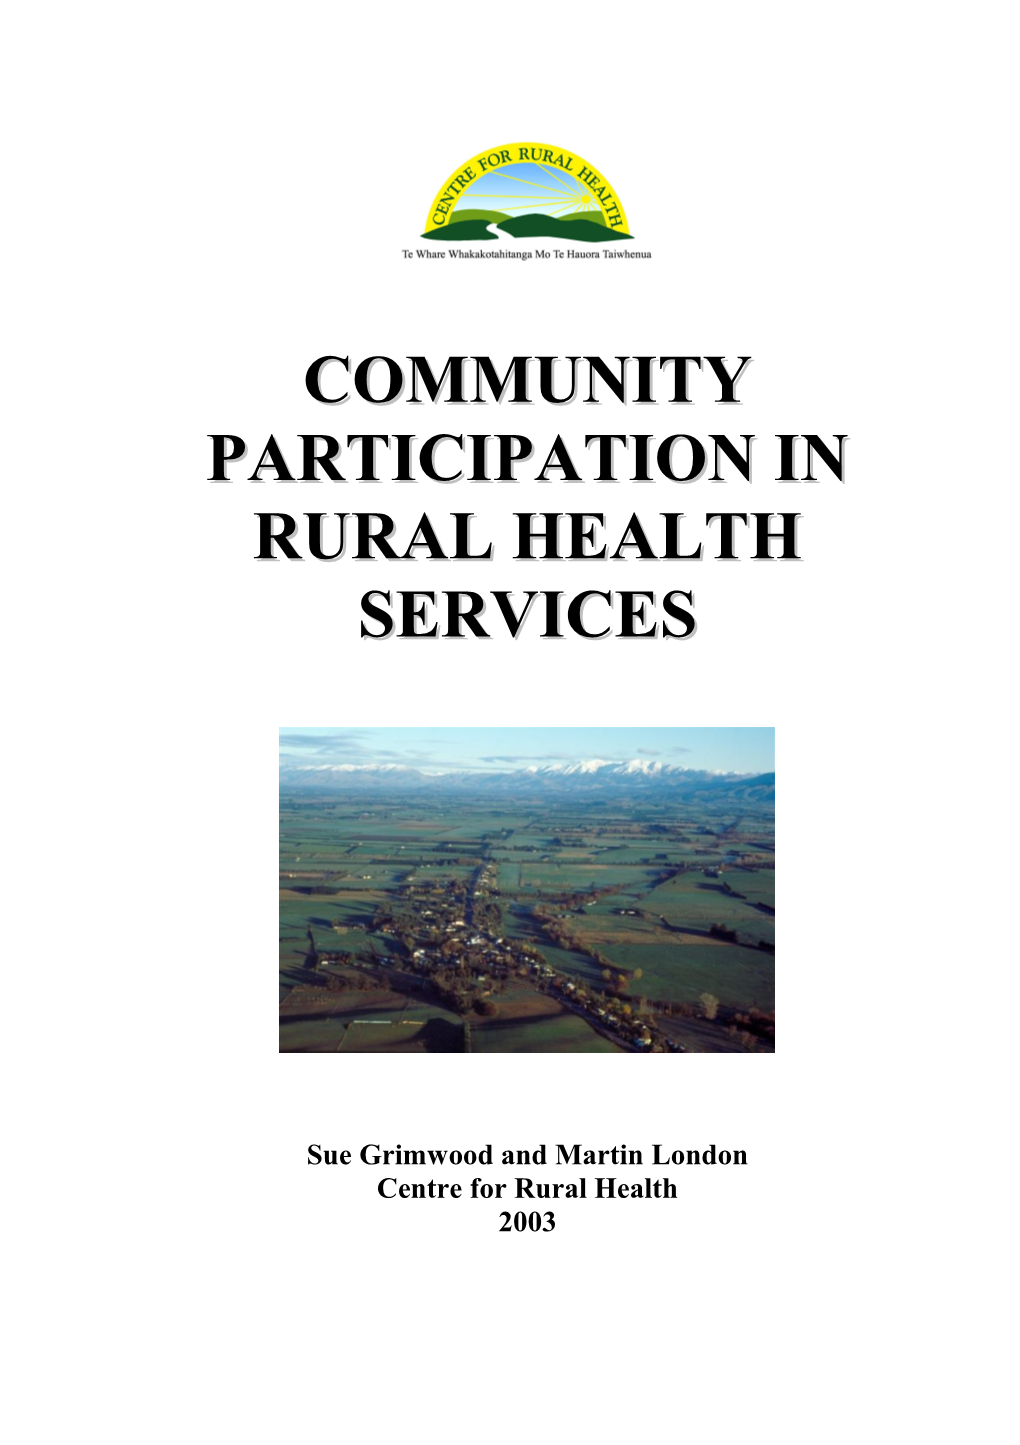 Participation in Rural Health Services